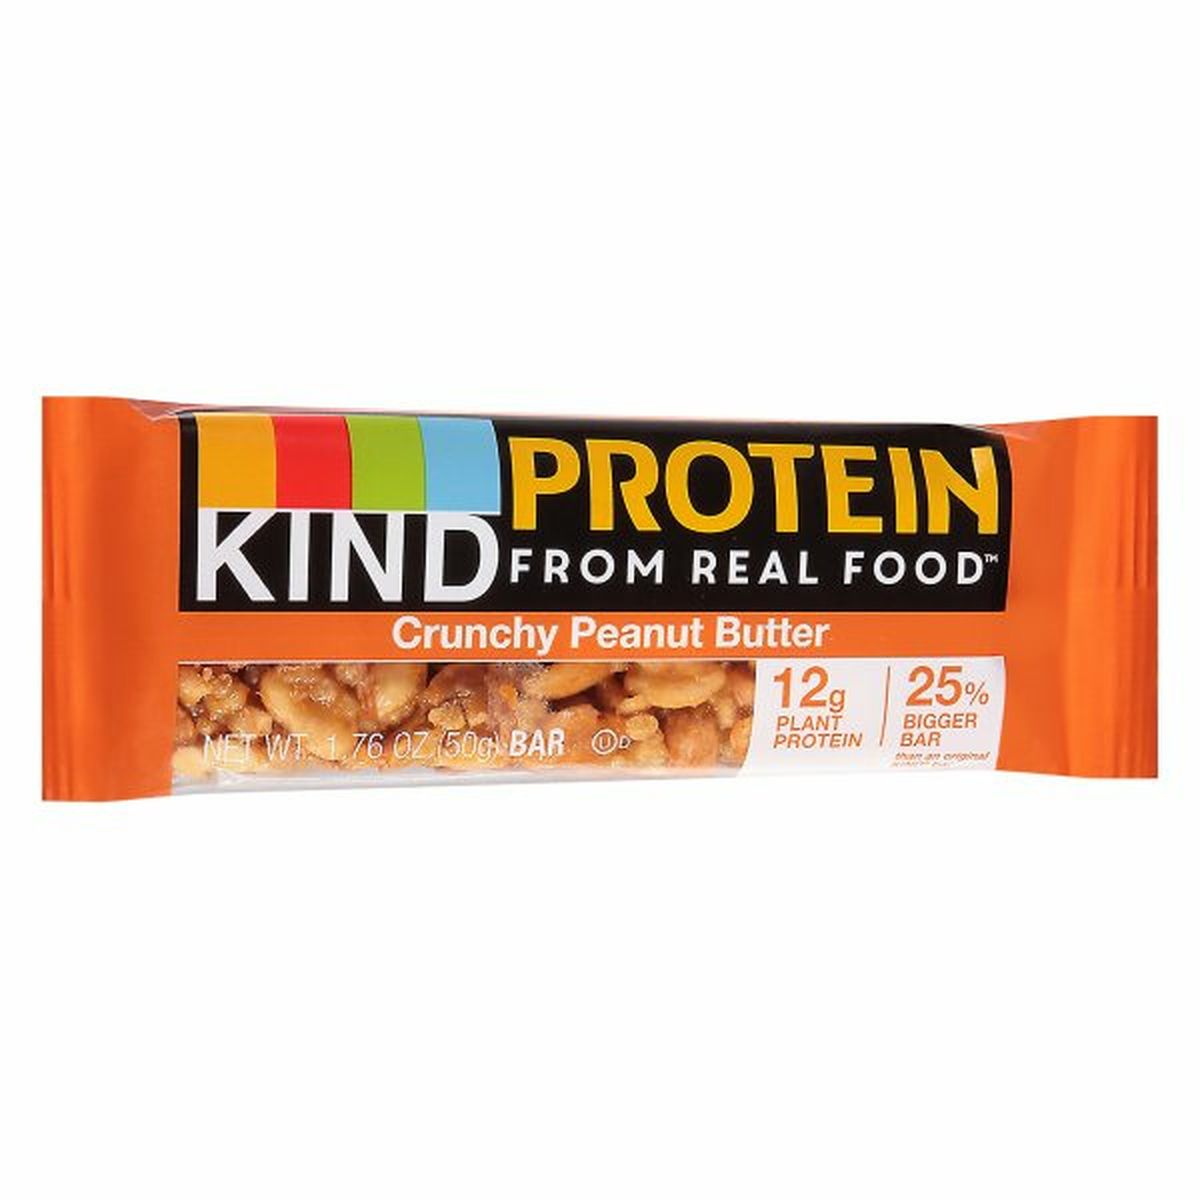 Calories in KIND Protein Bar, Crunchy Peanut Butter